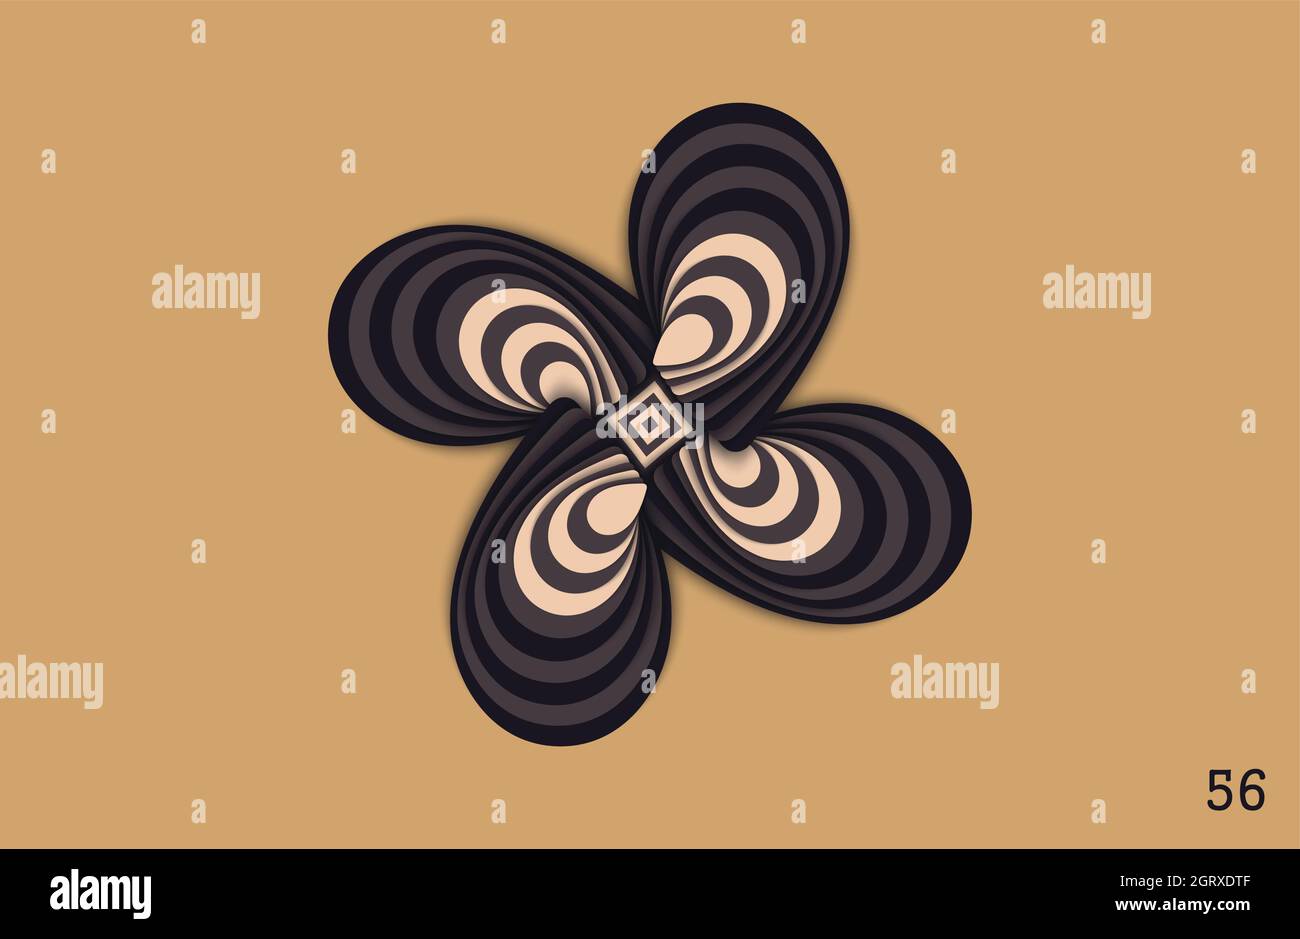 Fantastic flower. Paper art design element composed by overlapping elements. Strict and symmetrical 3D layered structure. Vector illustration Stock Vector